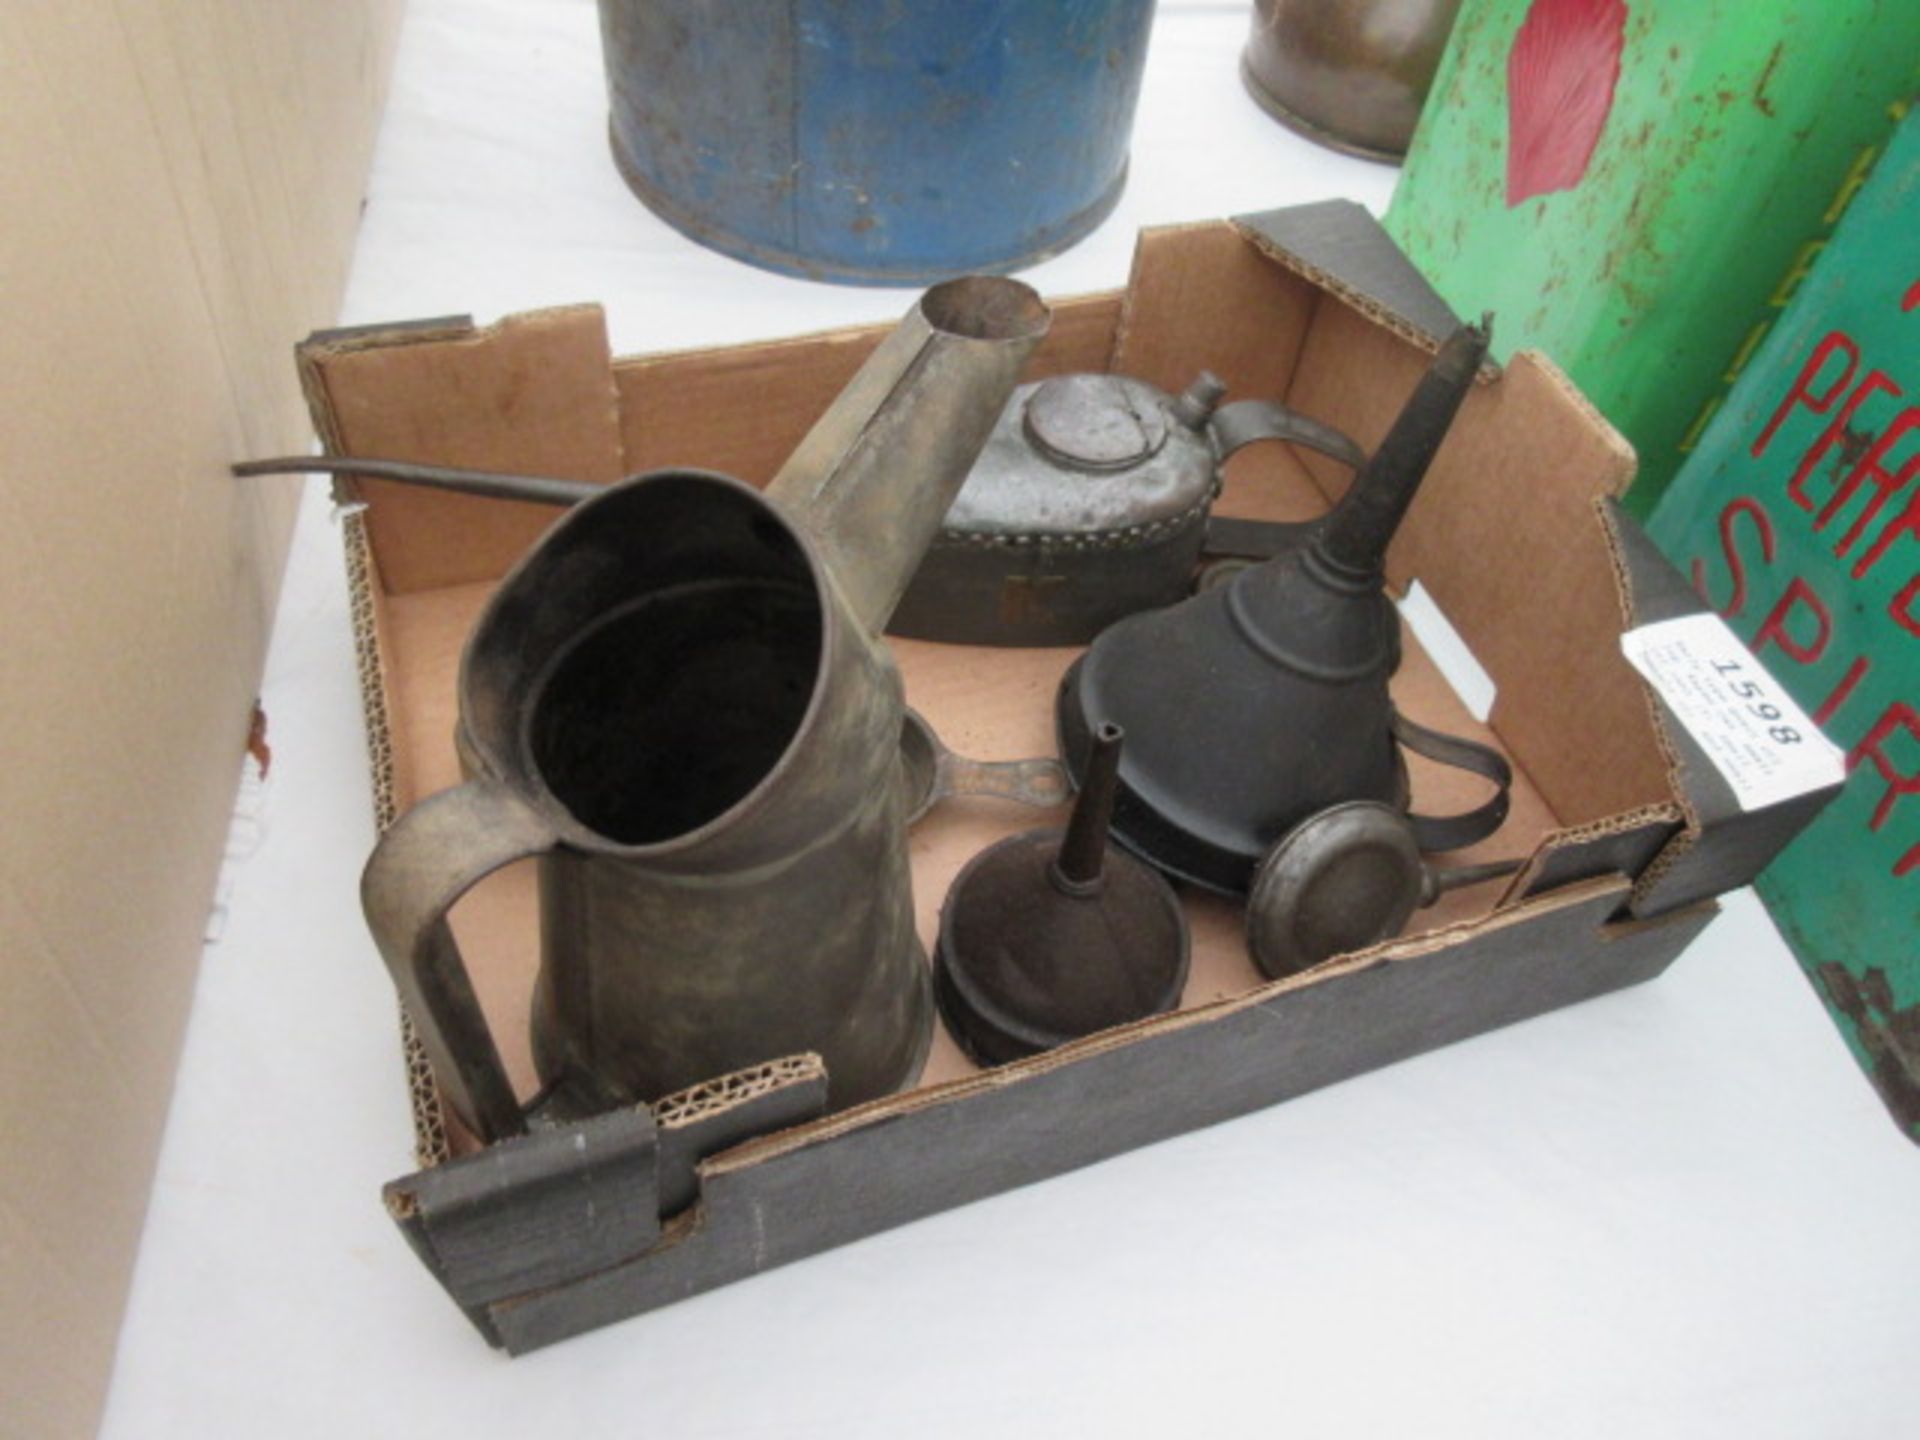 Early type quart oil jug, Kayes can, small oil cans (3), small funnels (2), and small filter